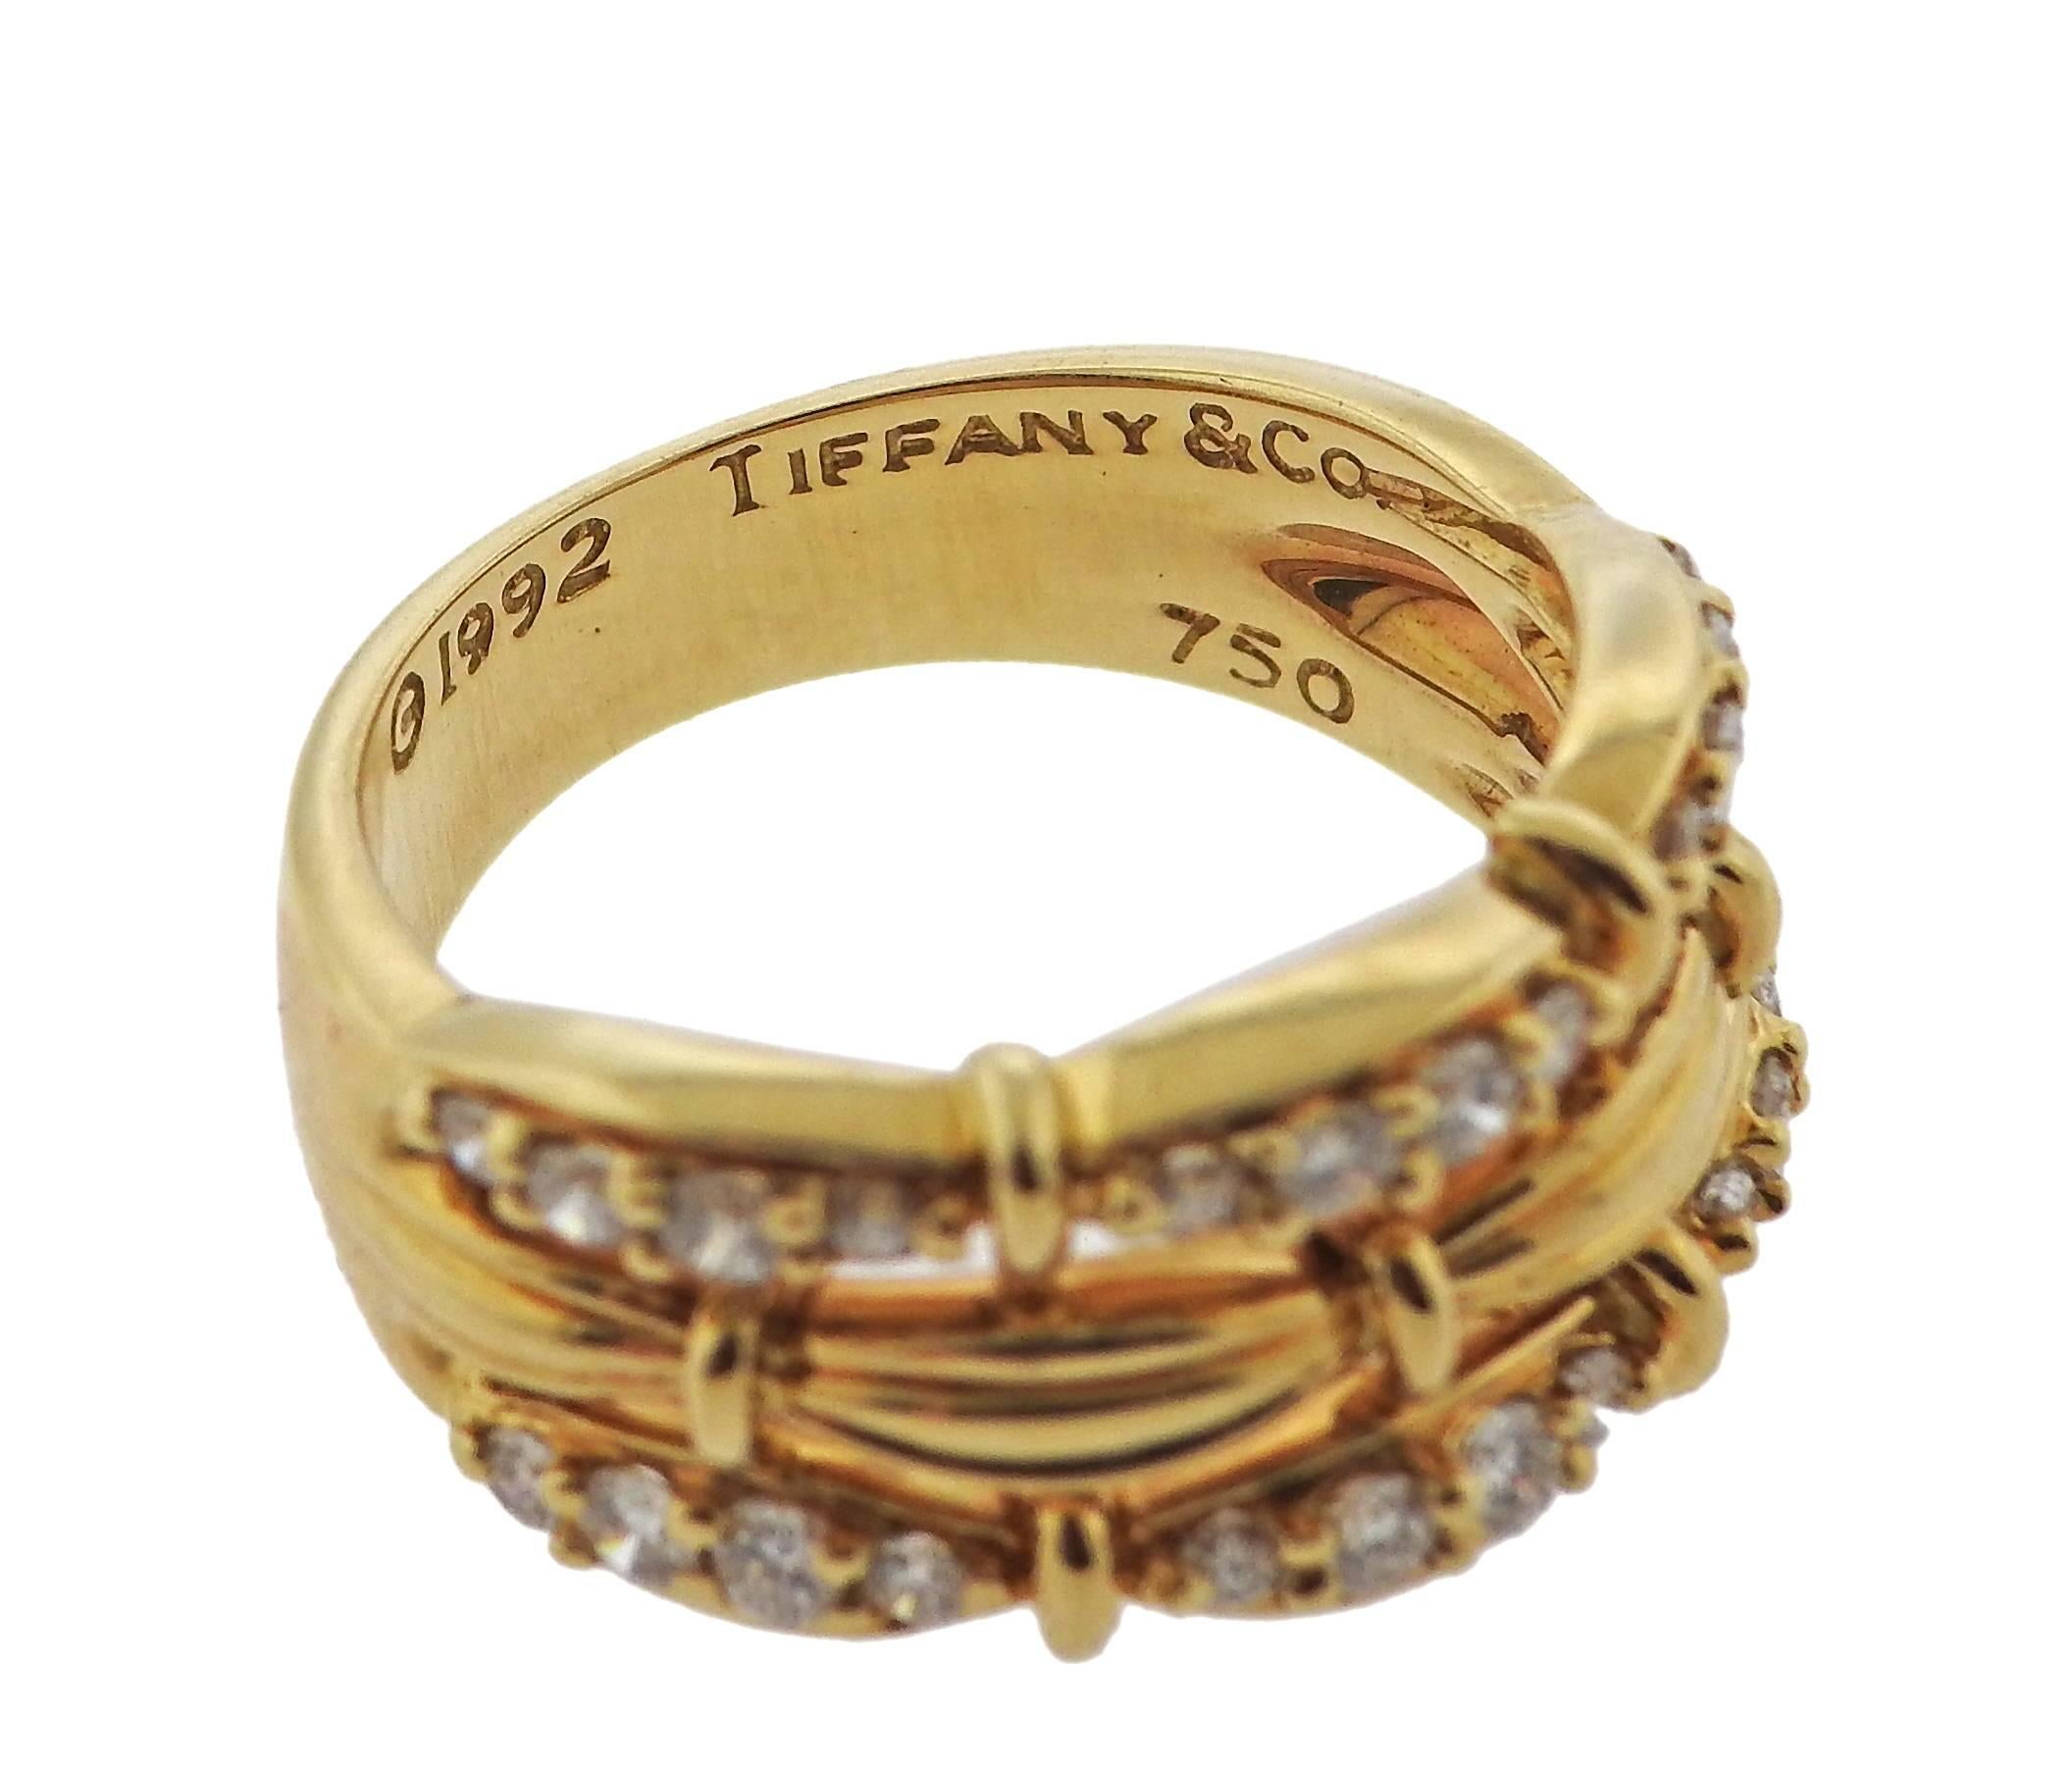 18k yellow gold ring, crafted by Tiffany & Co in circa 1992, set with approximately 0.60ctw in diamonds.  Ring size 7 1/4, ring top is 10.5mm wide and weighs 9.1 grams. Marked: Tiffany & Co, 1992, 750